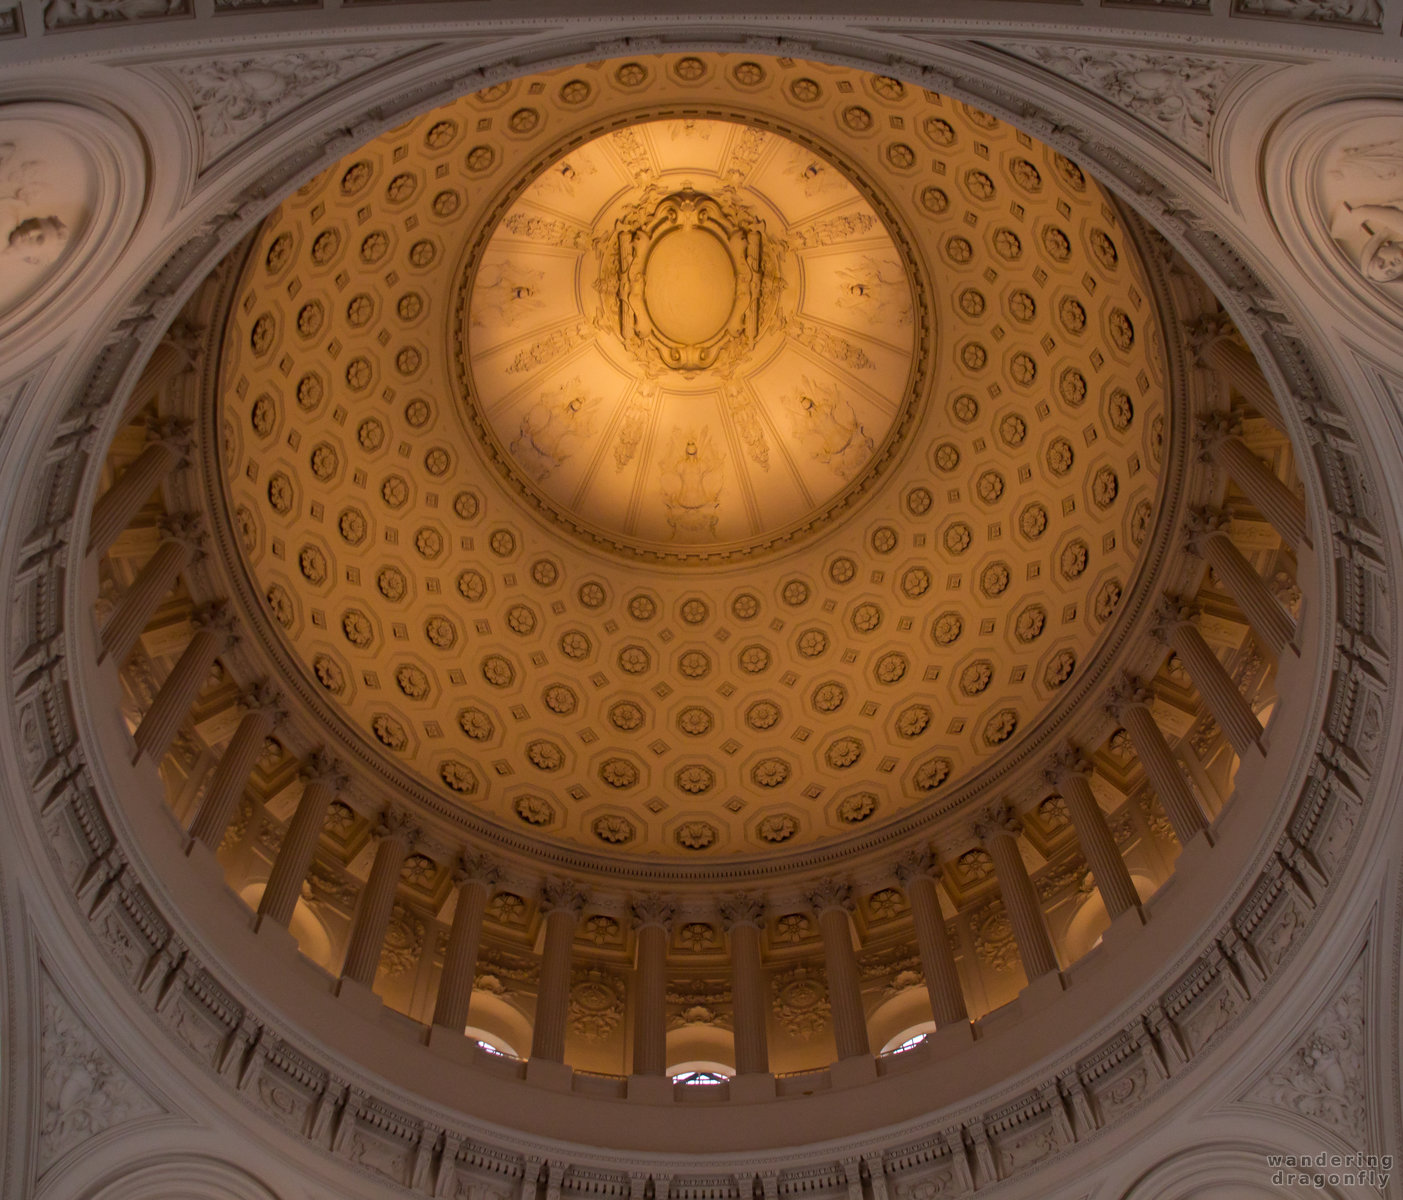 Dome of the San Francisco City Hall -- dome, pillar, relief